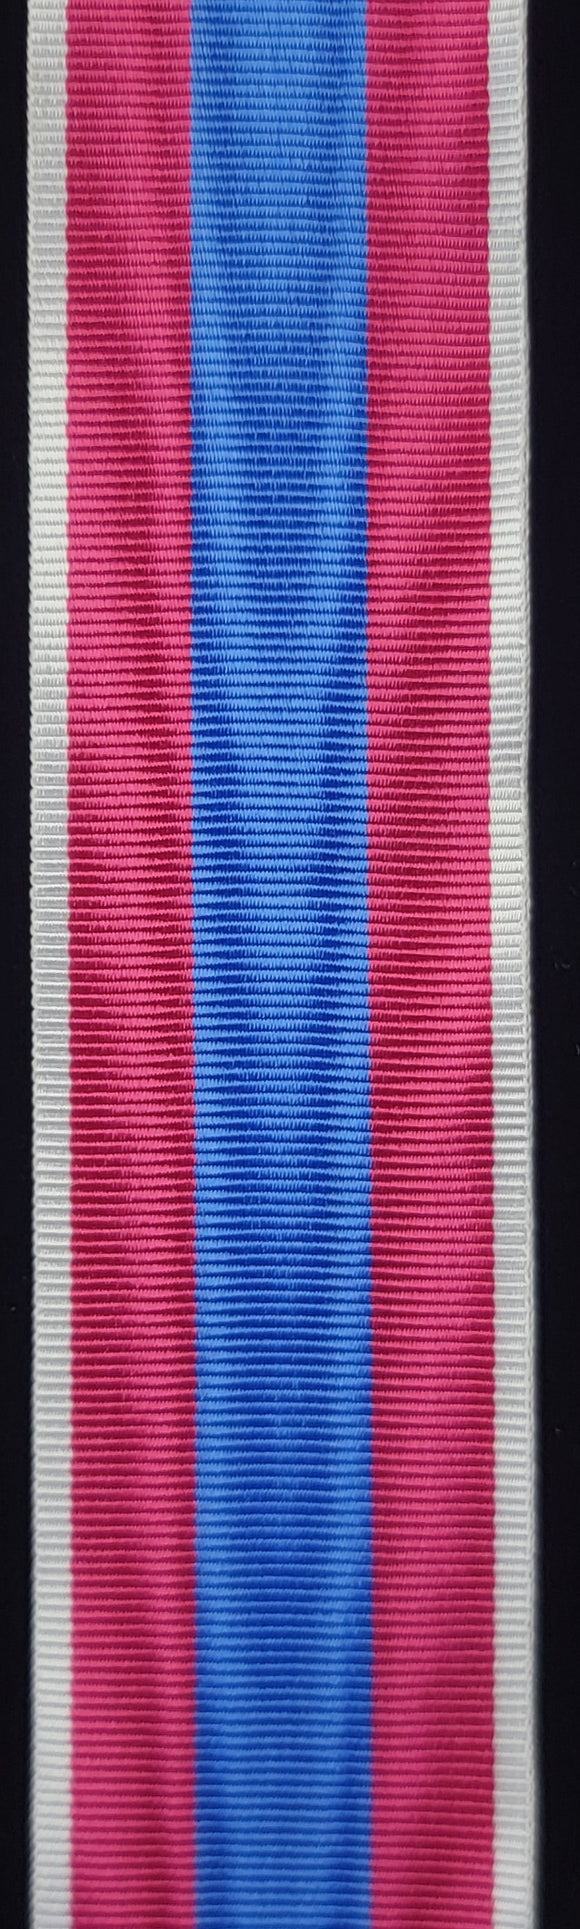 Ribbon, France National Defence Medal (Silver Class)